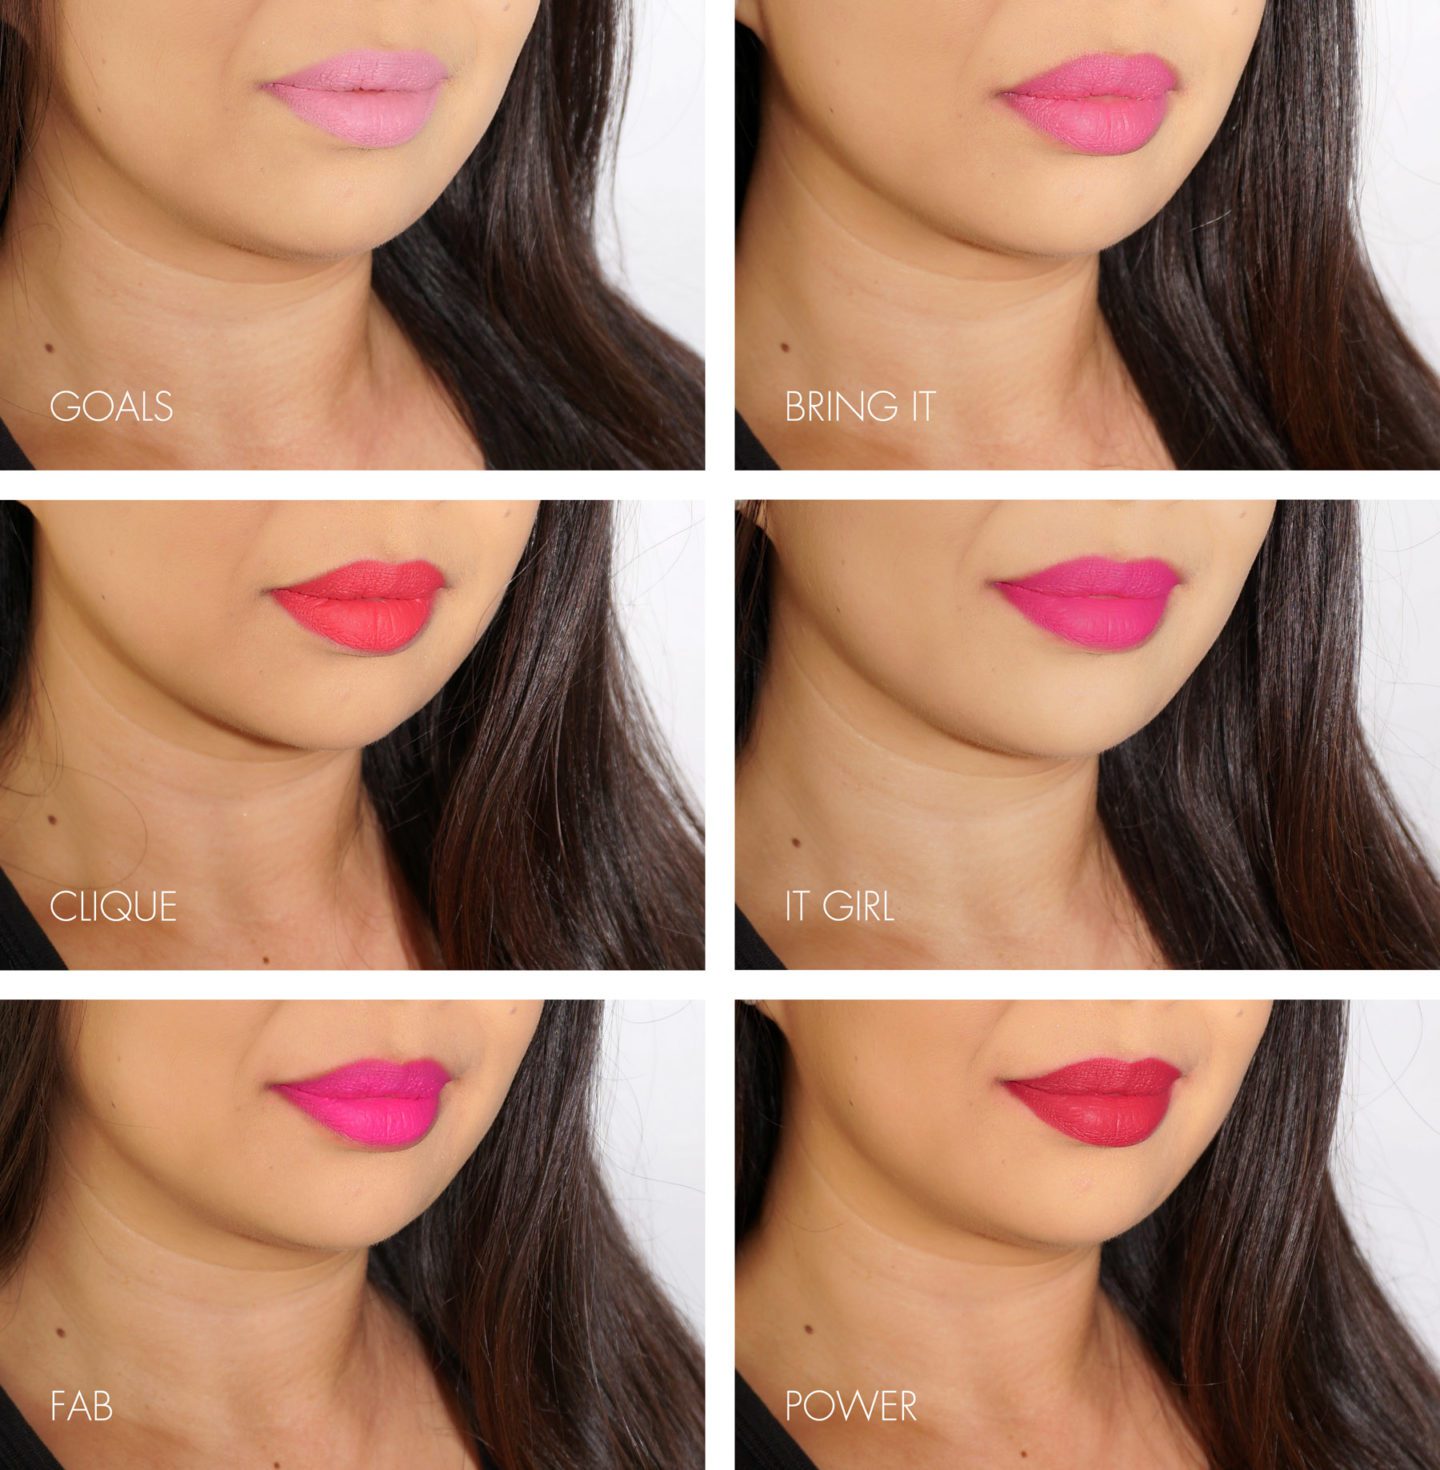 Laura Mercier Velour Extreme Goals, Bring It, Clique, It Girl, Fab and Power LIP SWATCHES